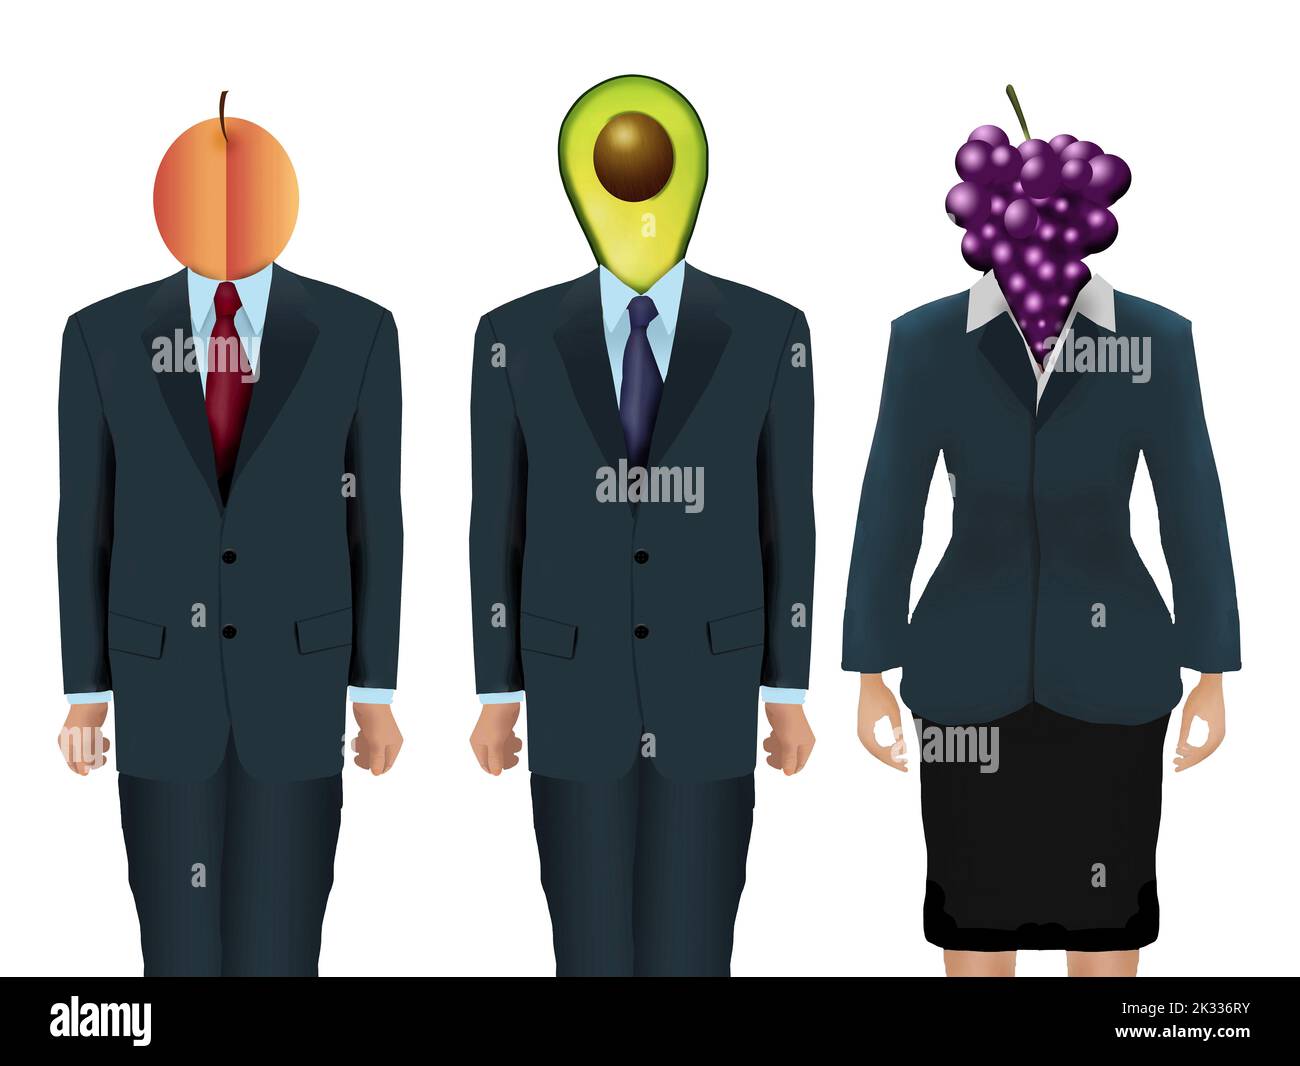 Vegan people are seen with fruit and vegetables for heads and faces in this 3-d illustration about being a vegetarian. Stock Photo